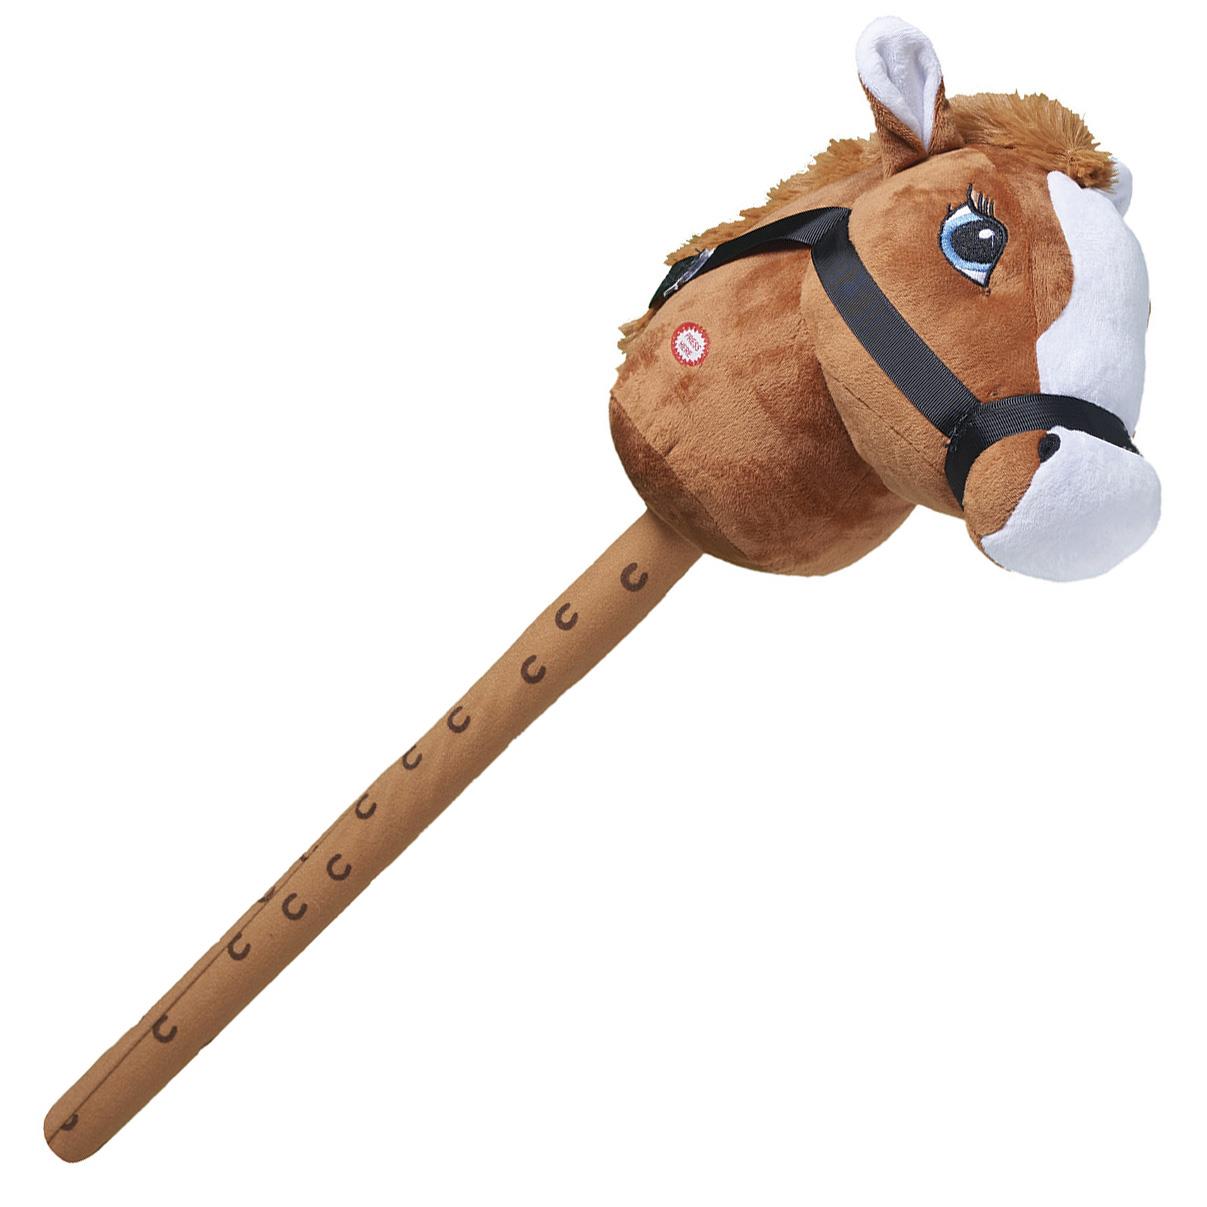 Brown Hobby Horse by The Magic Toy Shop - UKBuyZone